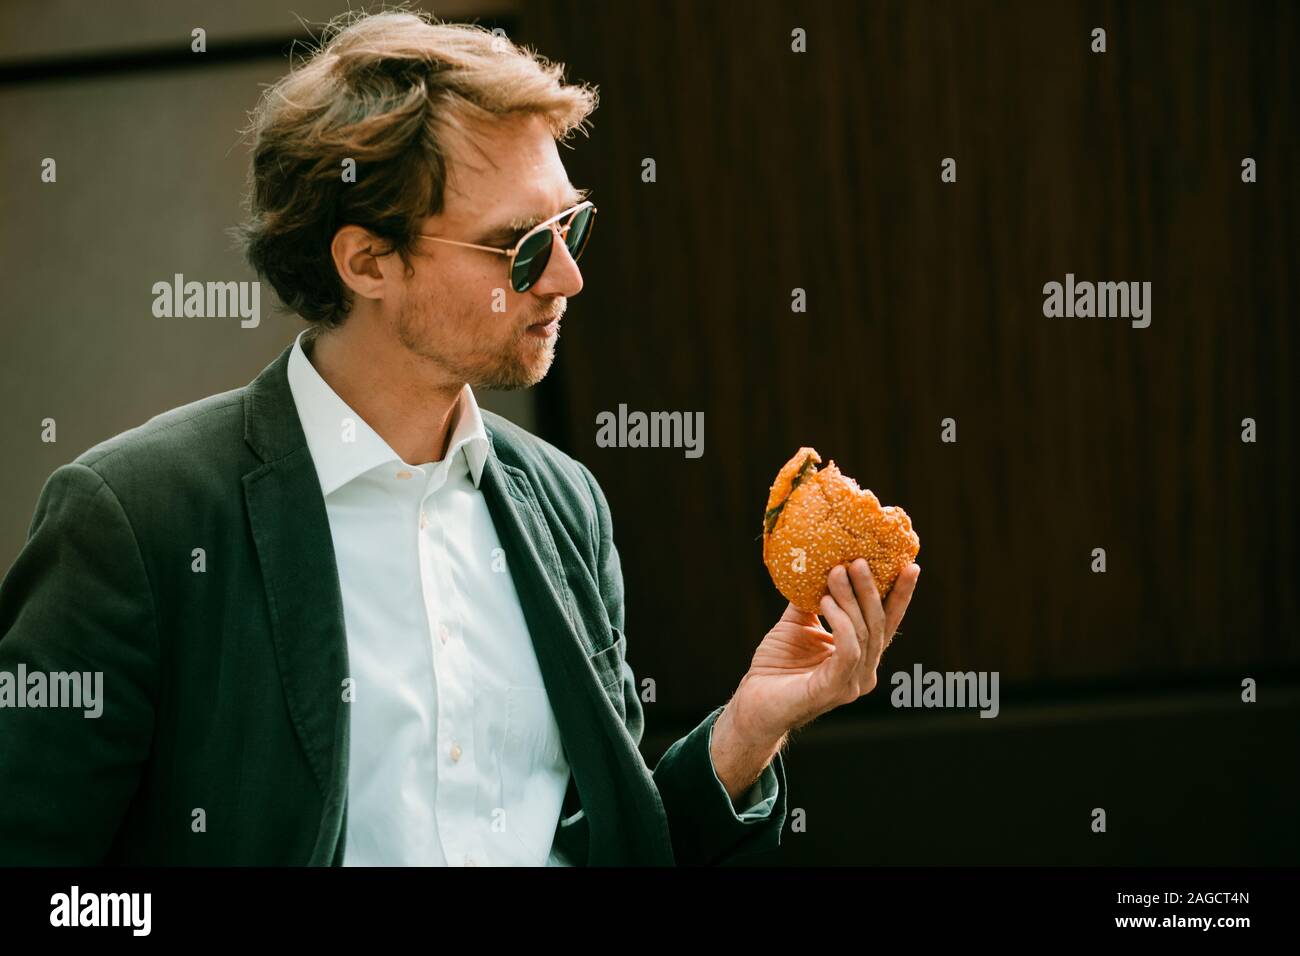 Man Holding A Burger In His Hand Stock Photo